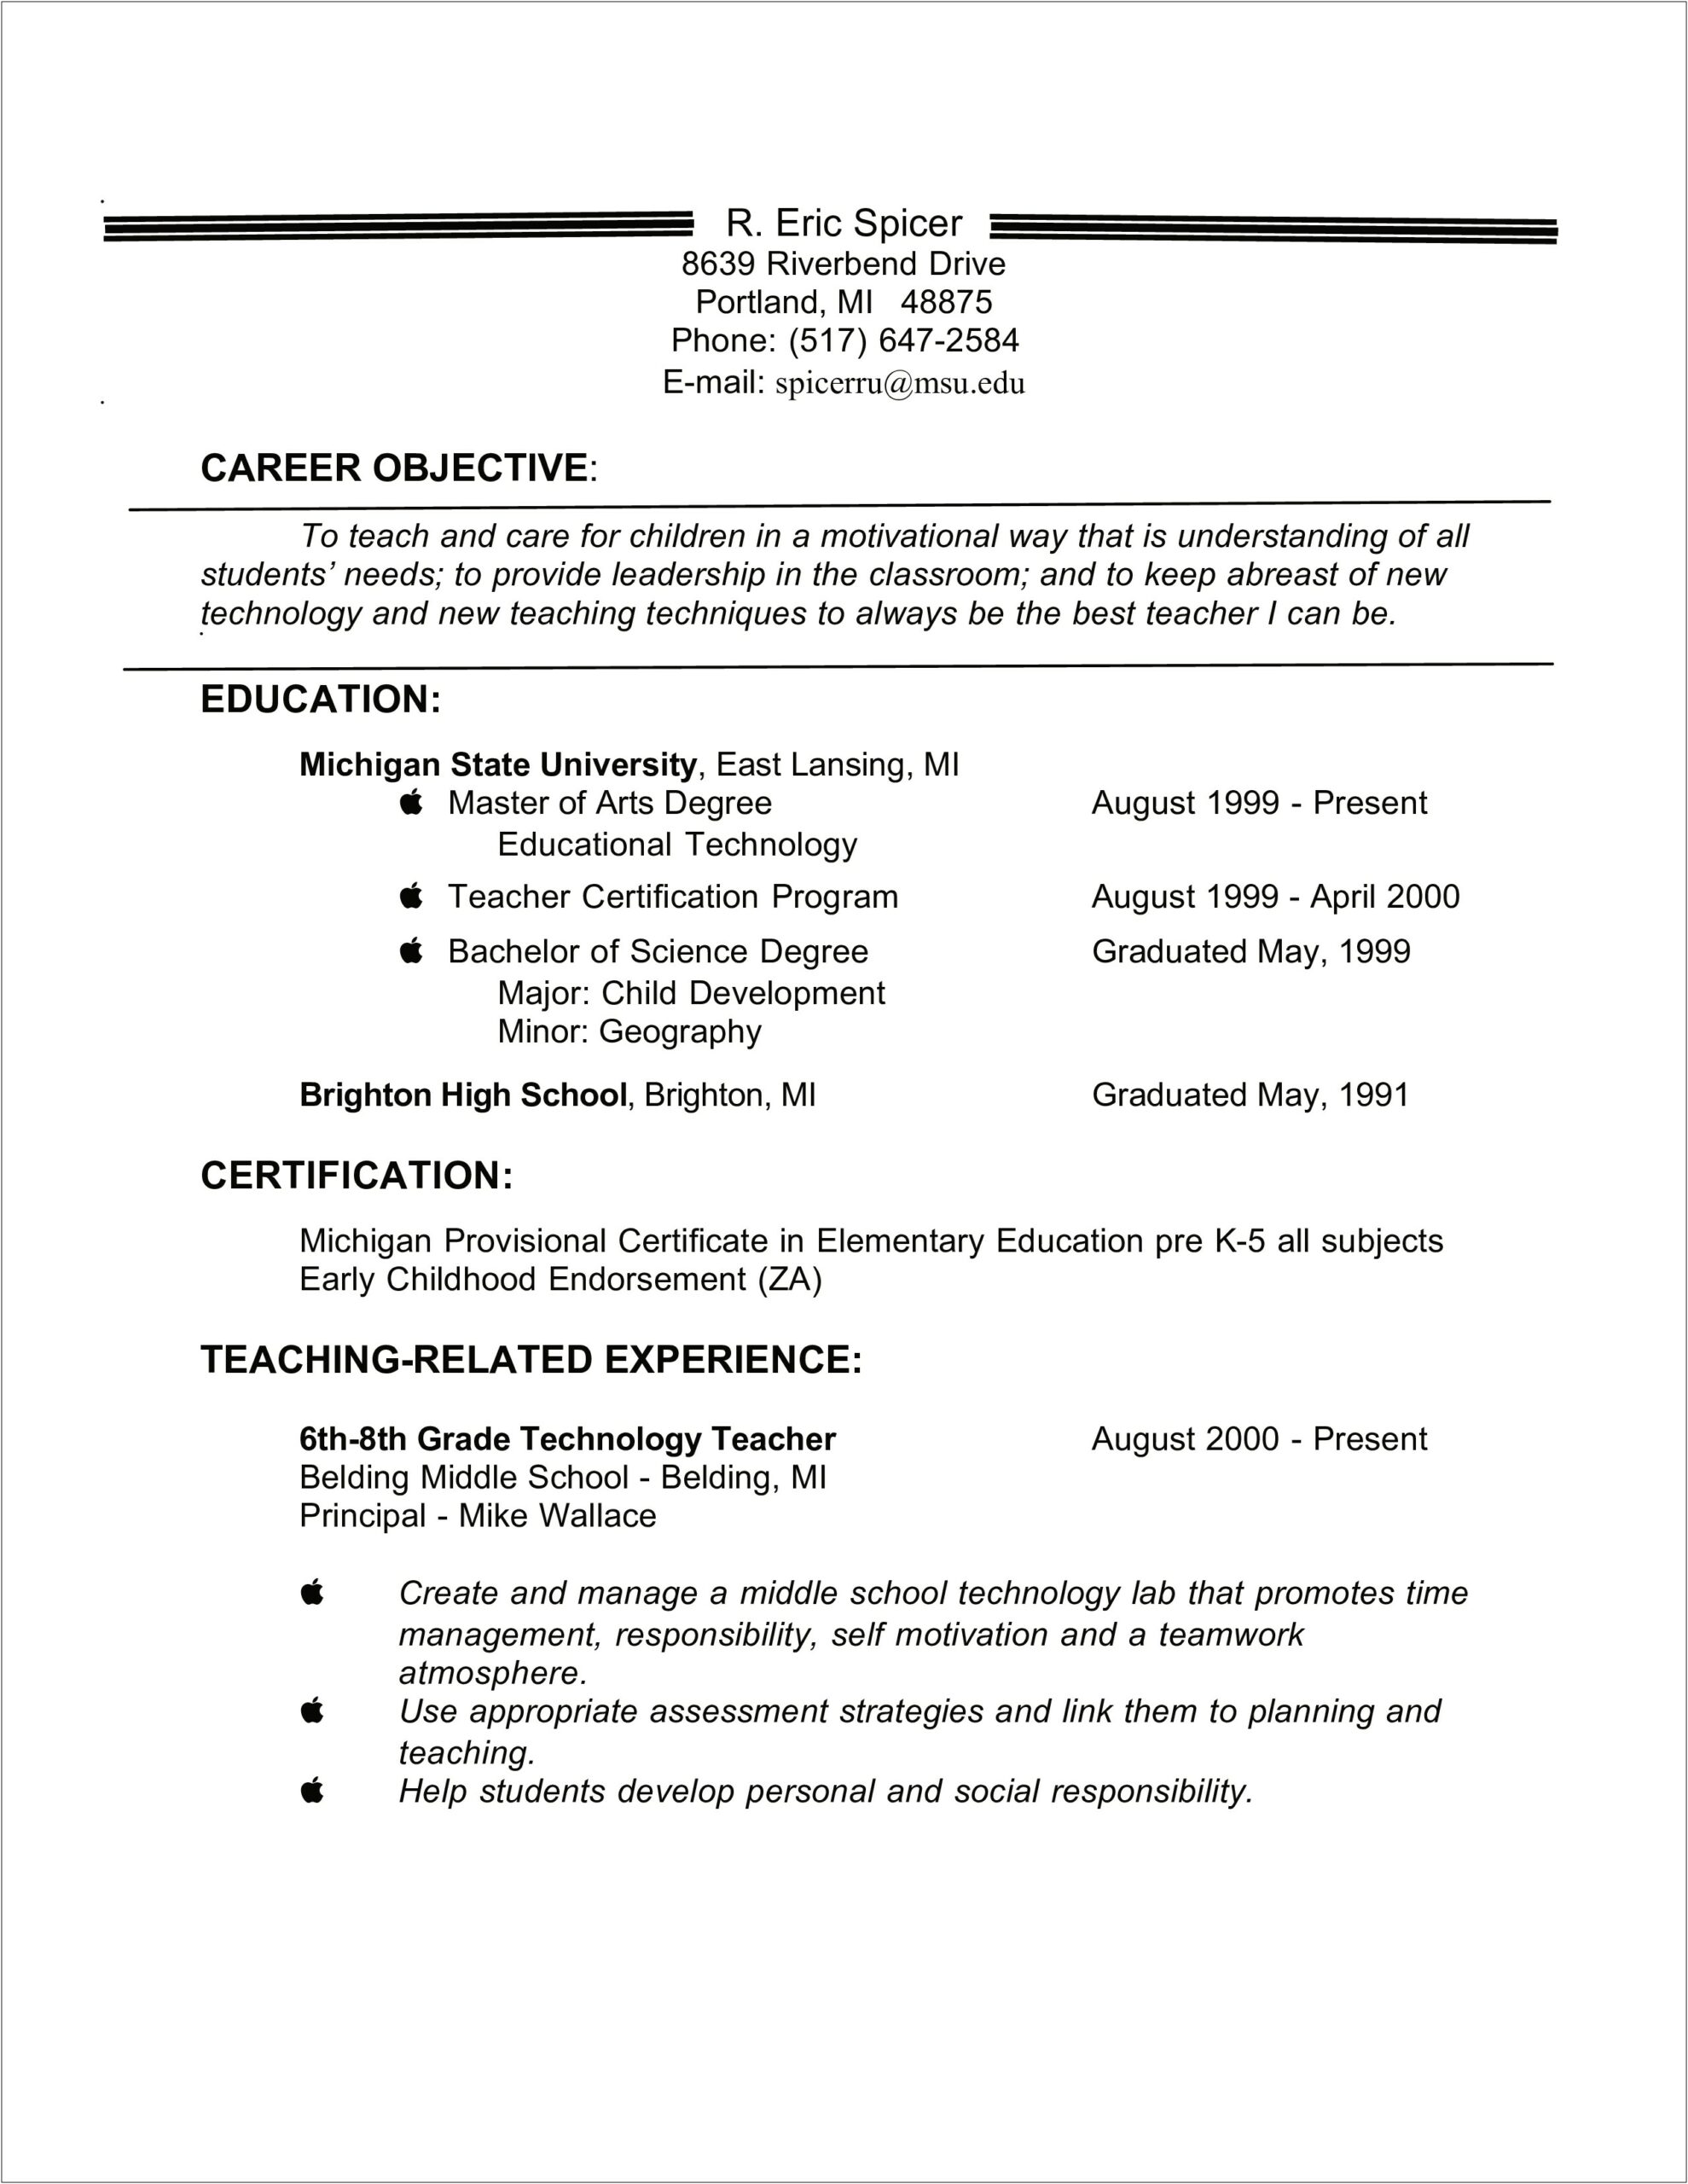 Resume Objective For Graduating Student